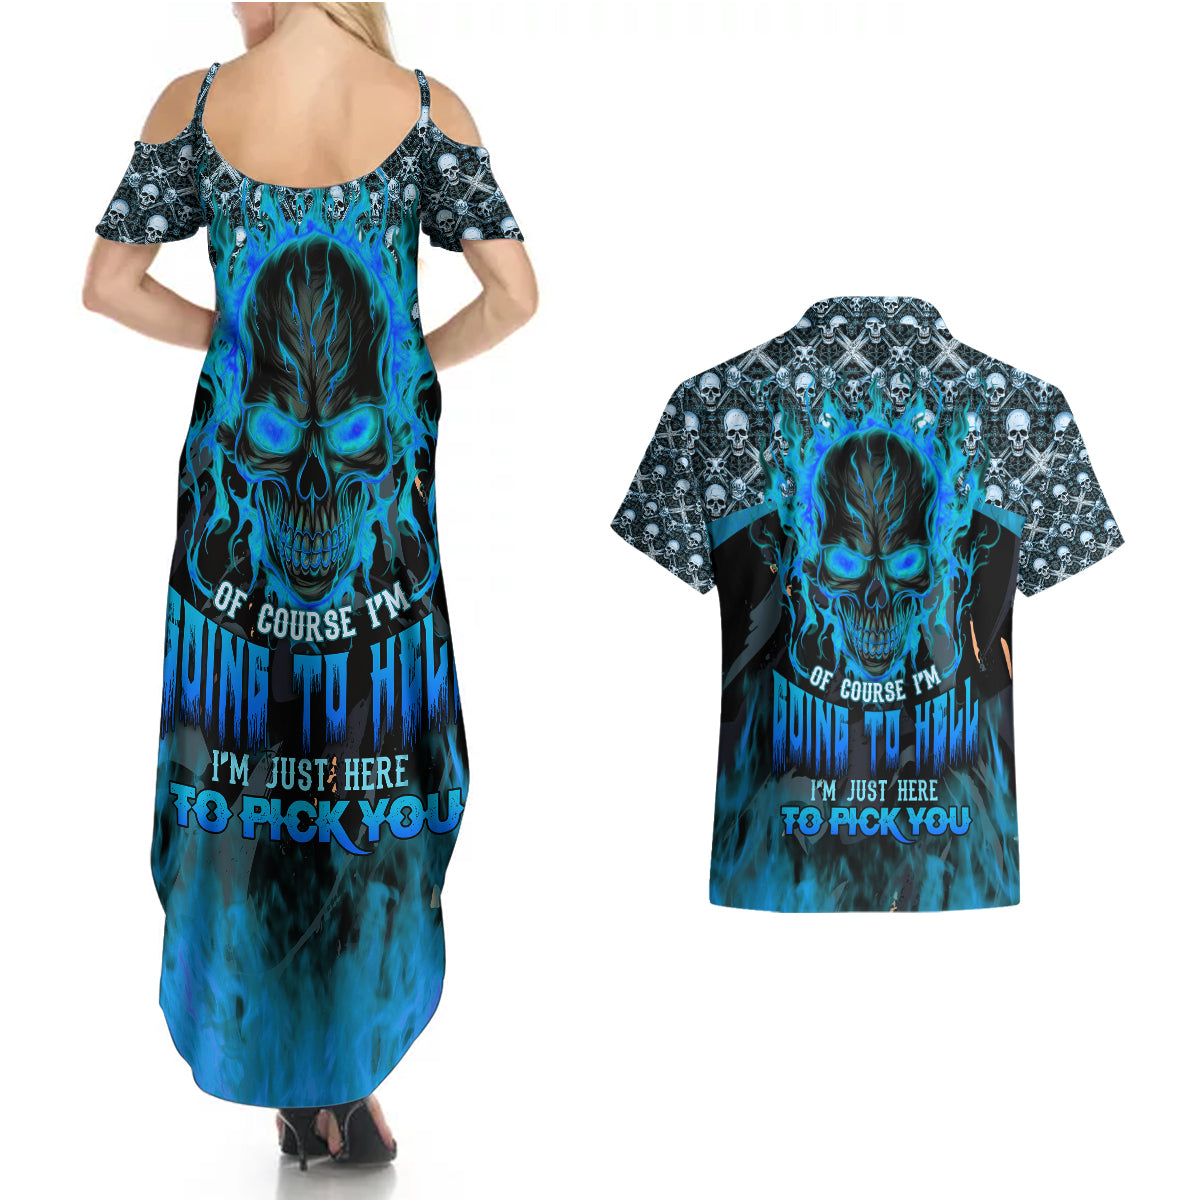 fire-skull-couples-matching-summer-maxi-dress-and-hawaiian-shirt-of-course-im-going-to-hell-im-just-here-to-pick-you-up